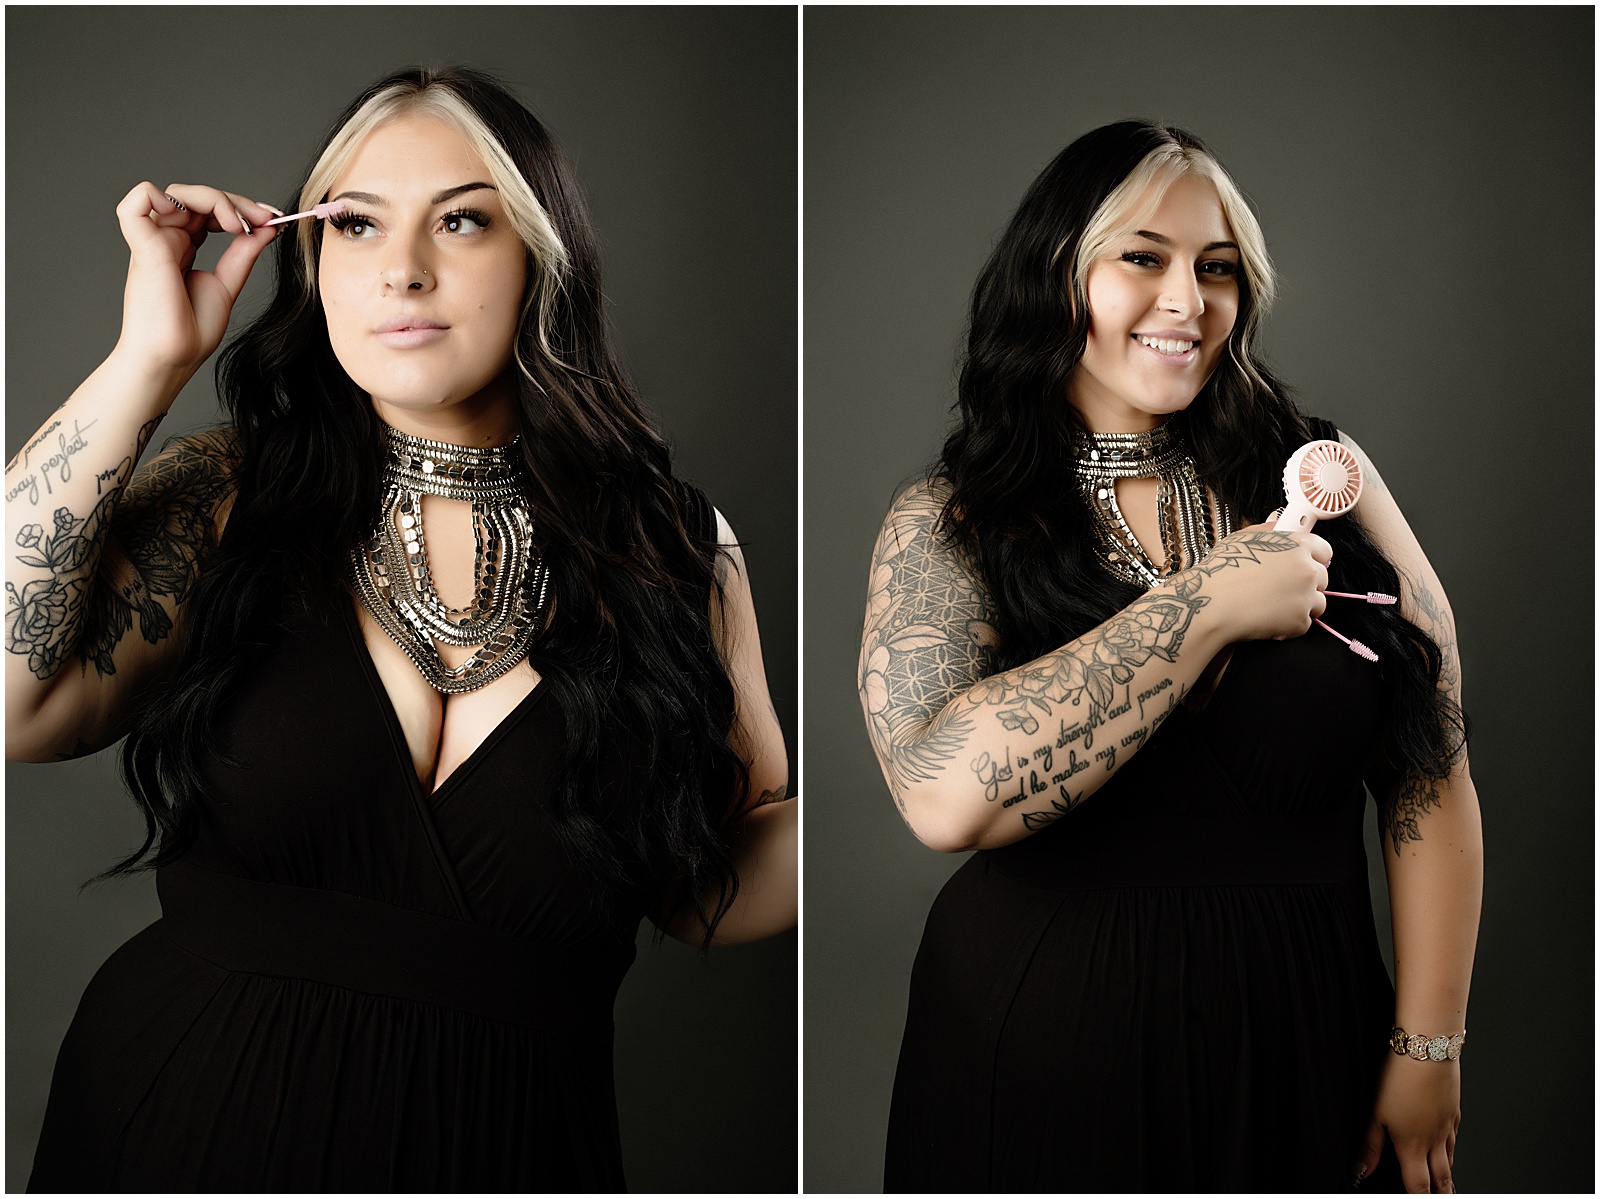 Image of a woman wearing a black dress holding cosmetic props | Professional Headshots by Amanda Ellis Photography